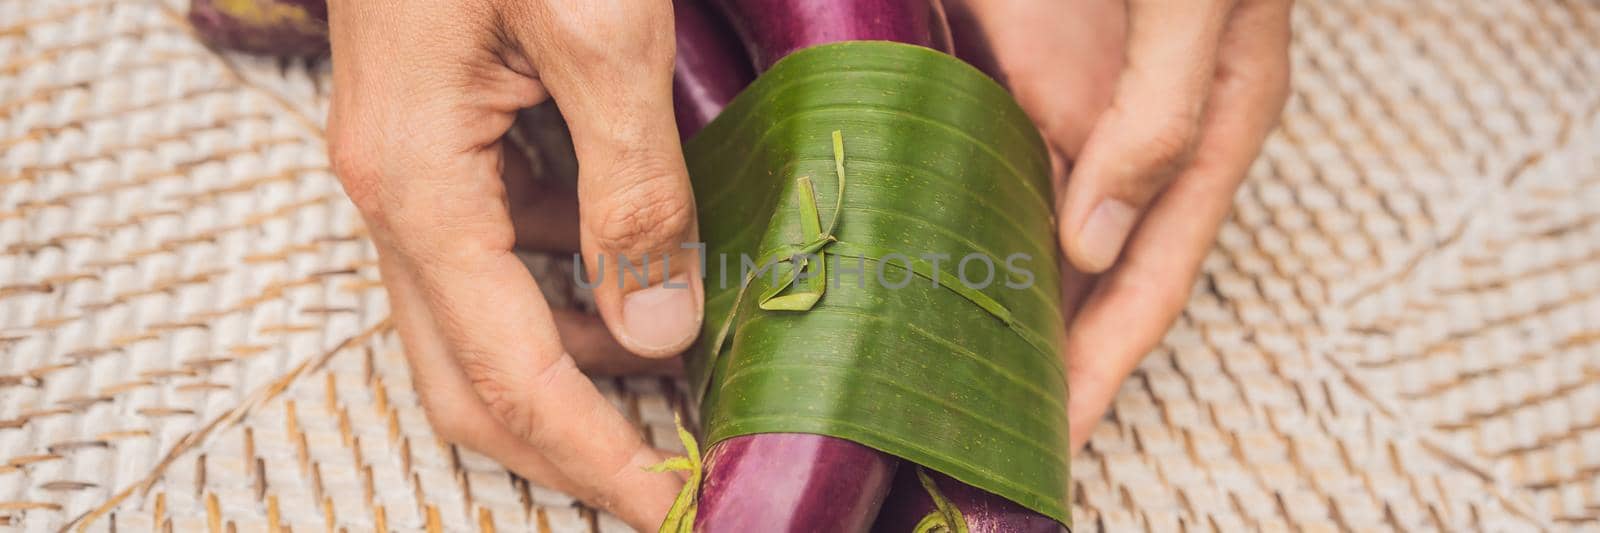 BANNER, LONG FORMAT Eco-friendly product packaging concept. Eggplant wrapped in a banana leaf, as an alternative to a plastic bag. Zero waste concept. Alternative packaging.